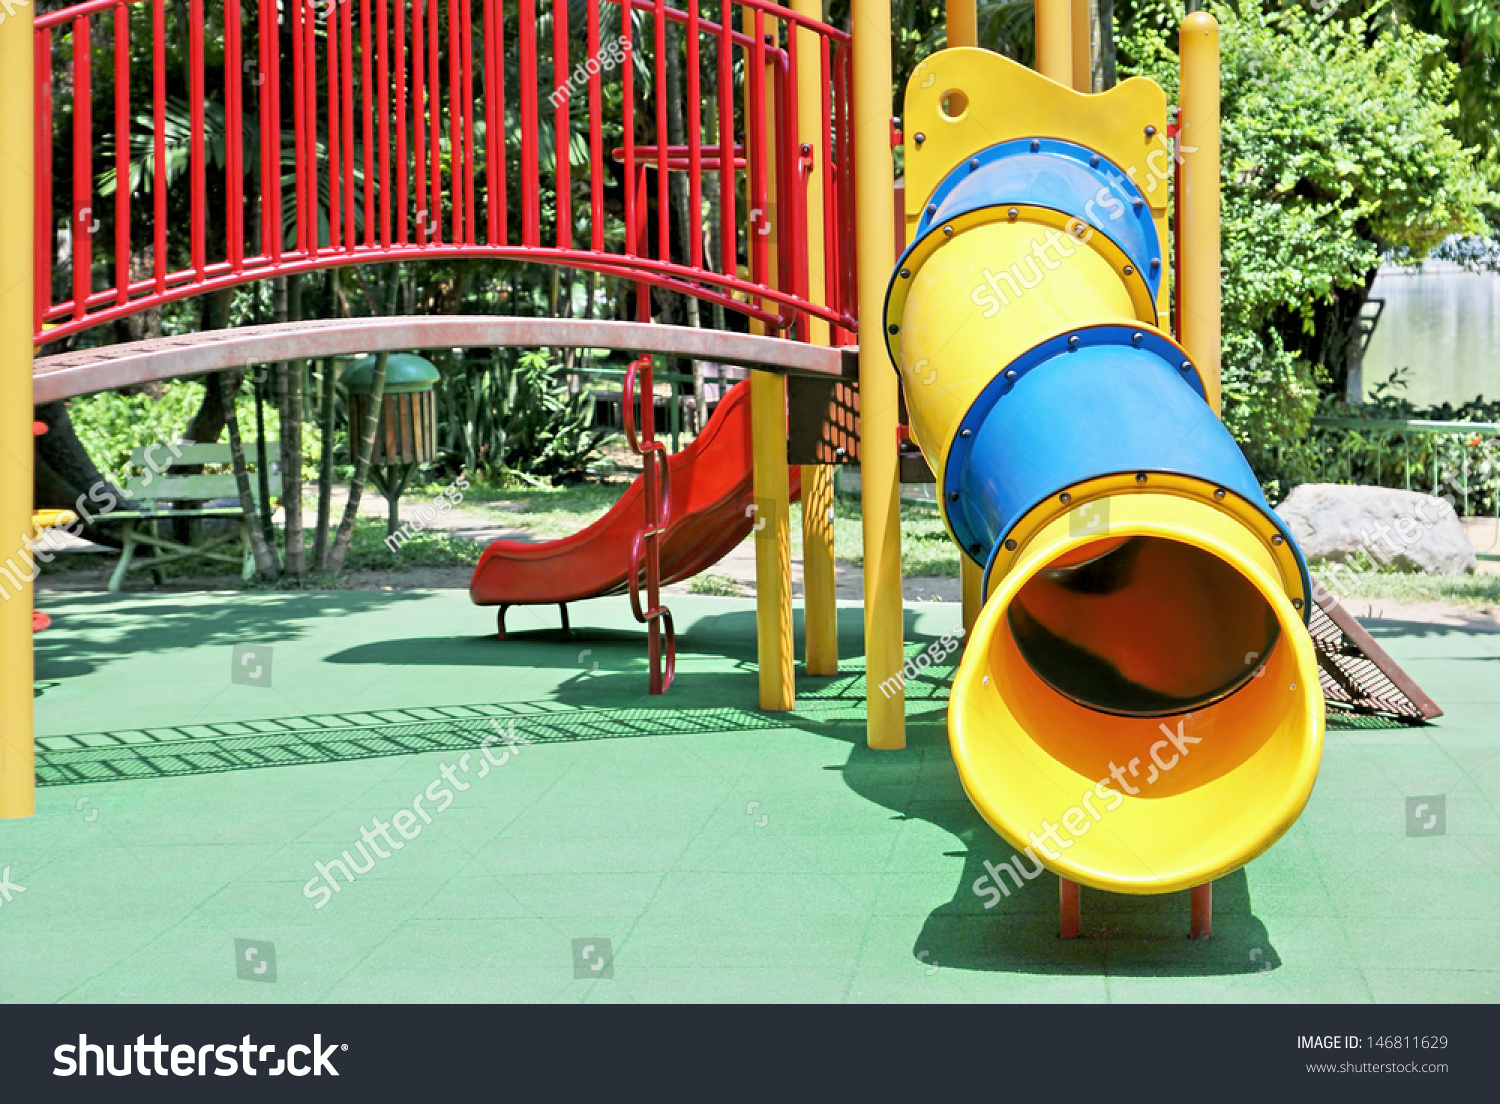 Slide Tunnel For Kids In Outdoor Playground Stock Photo 146811629